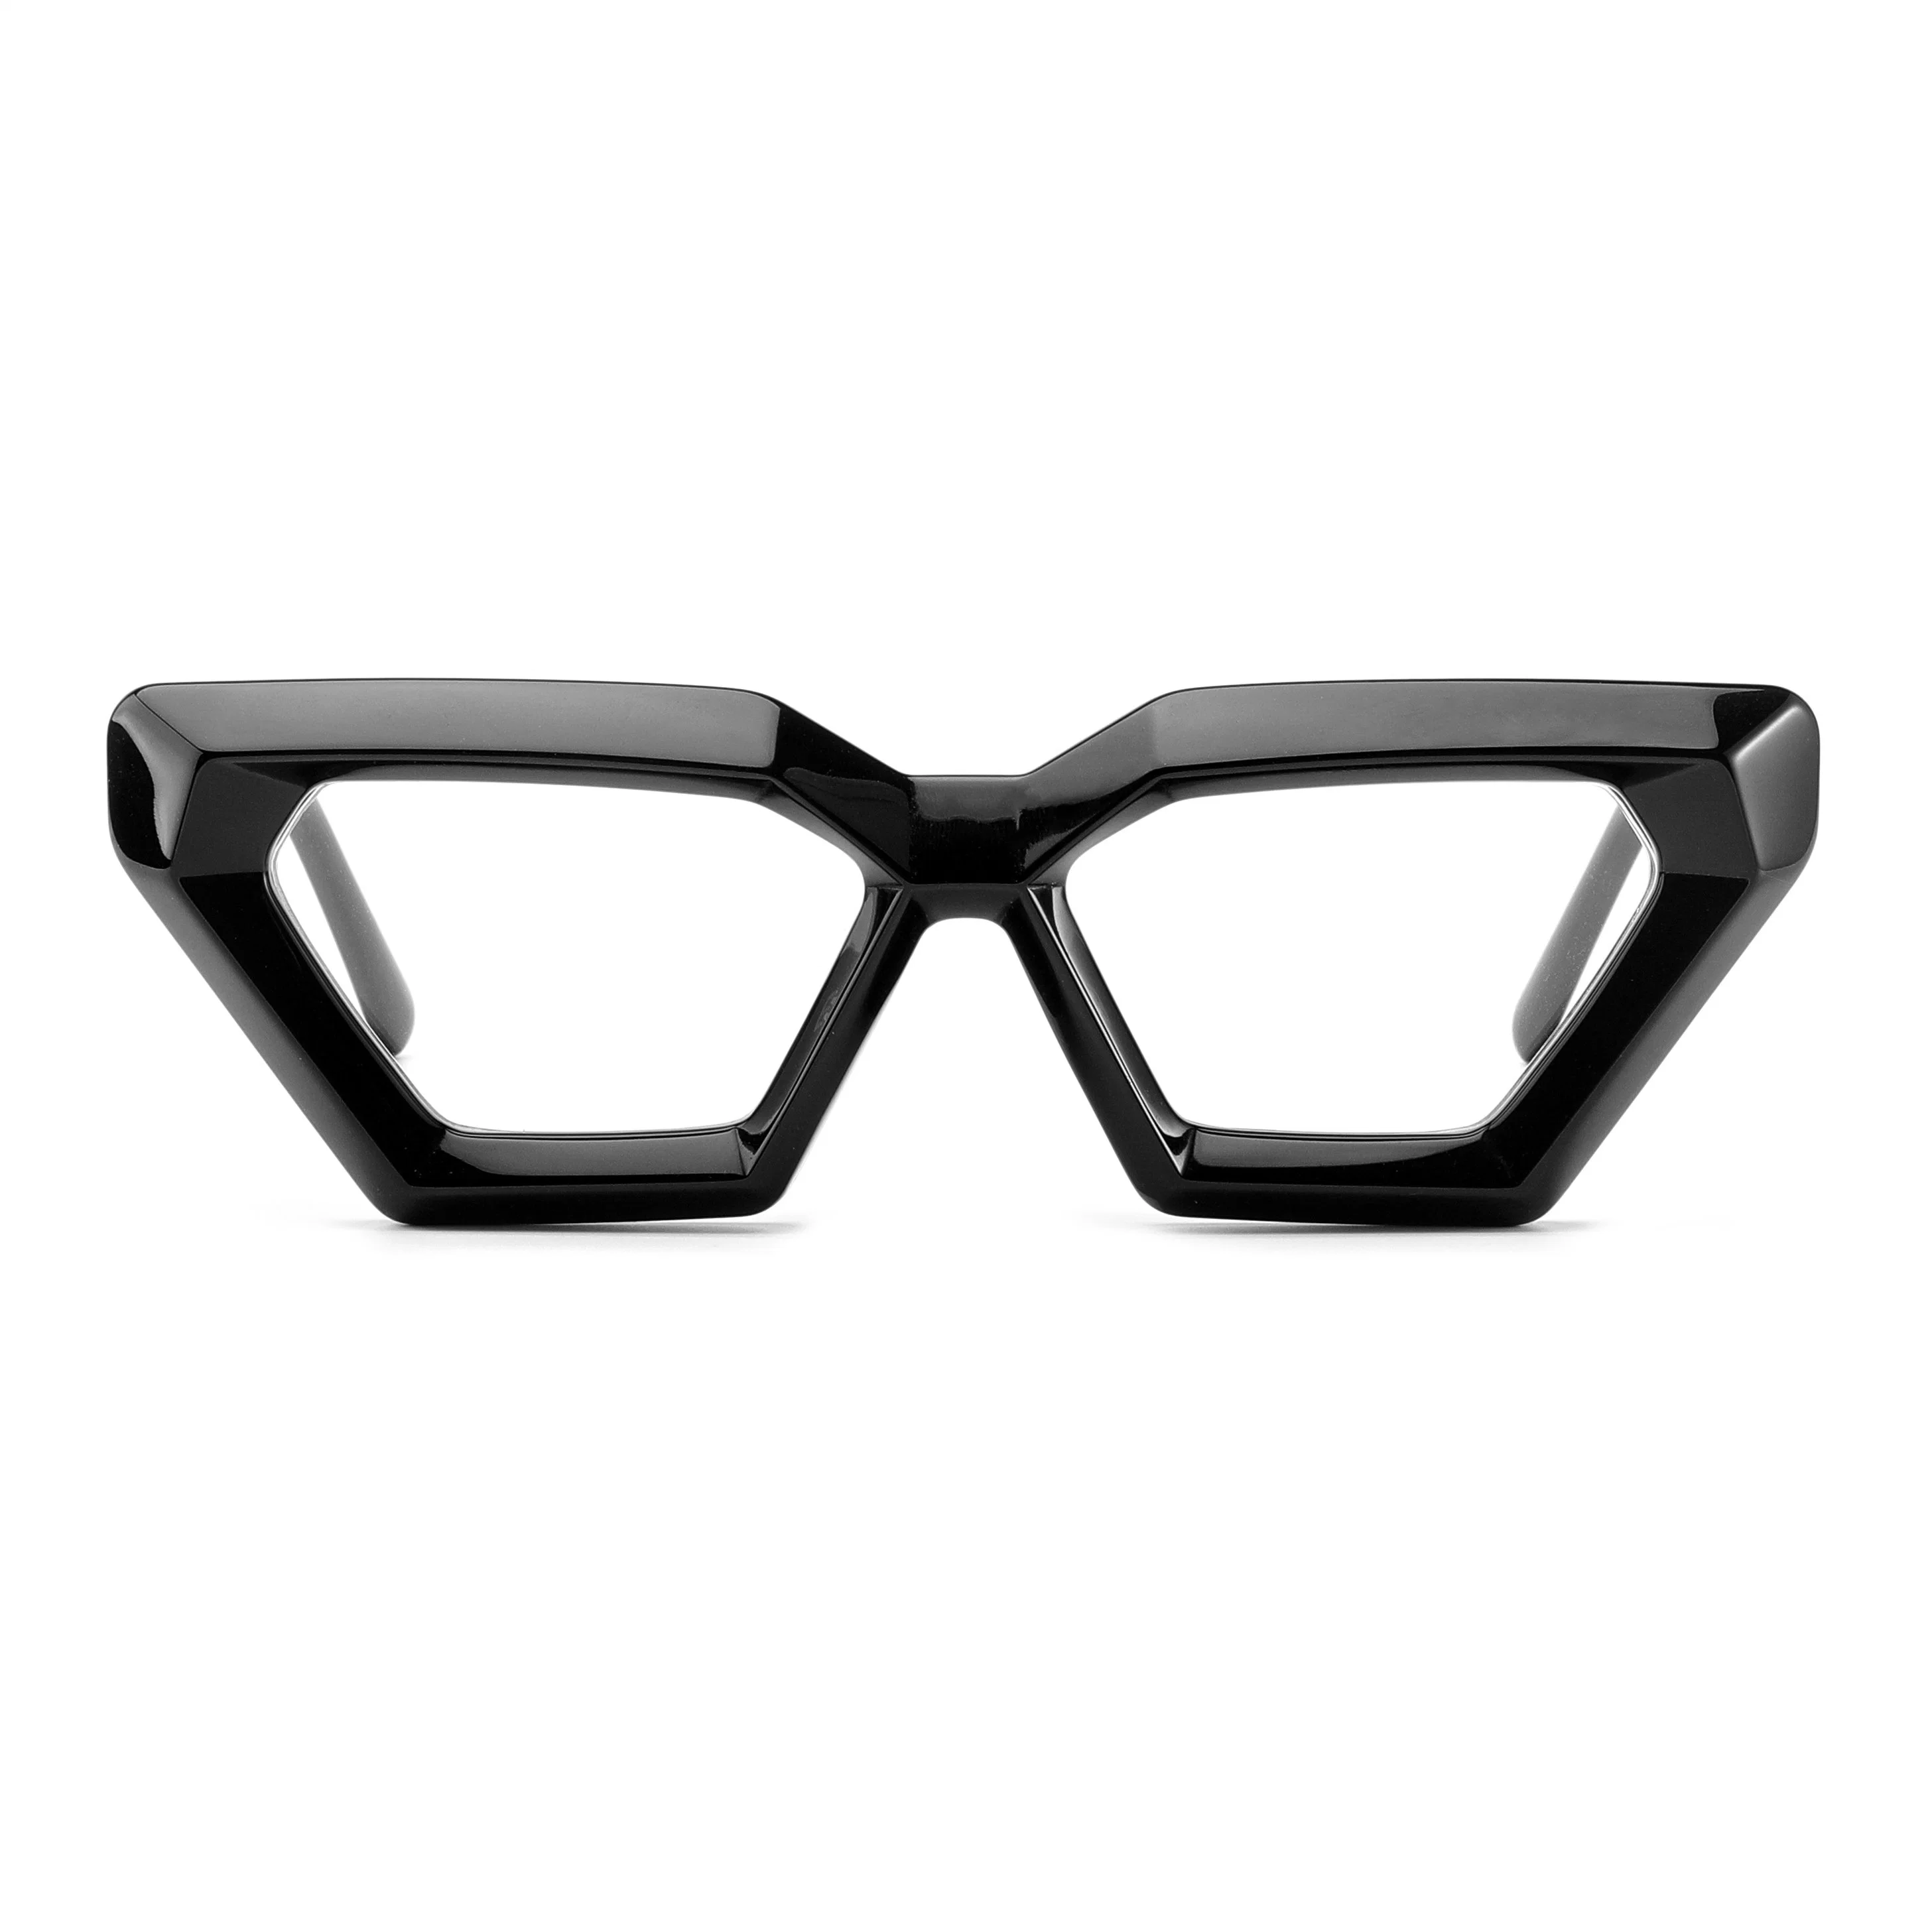 Fashion Design Thick Heavy Acetate Abnormity Eyeglasses with CE Optical Frames